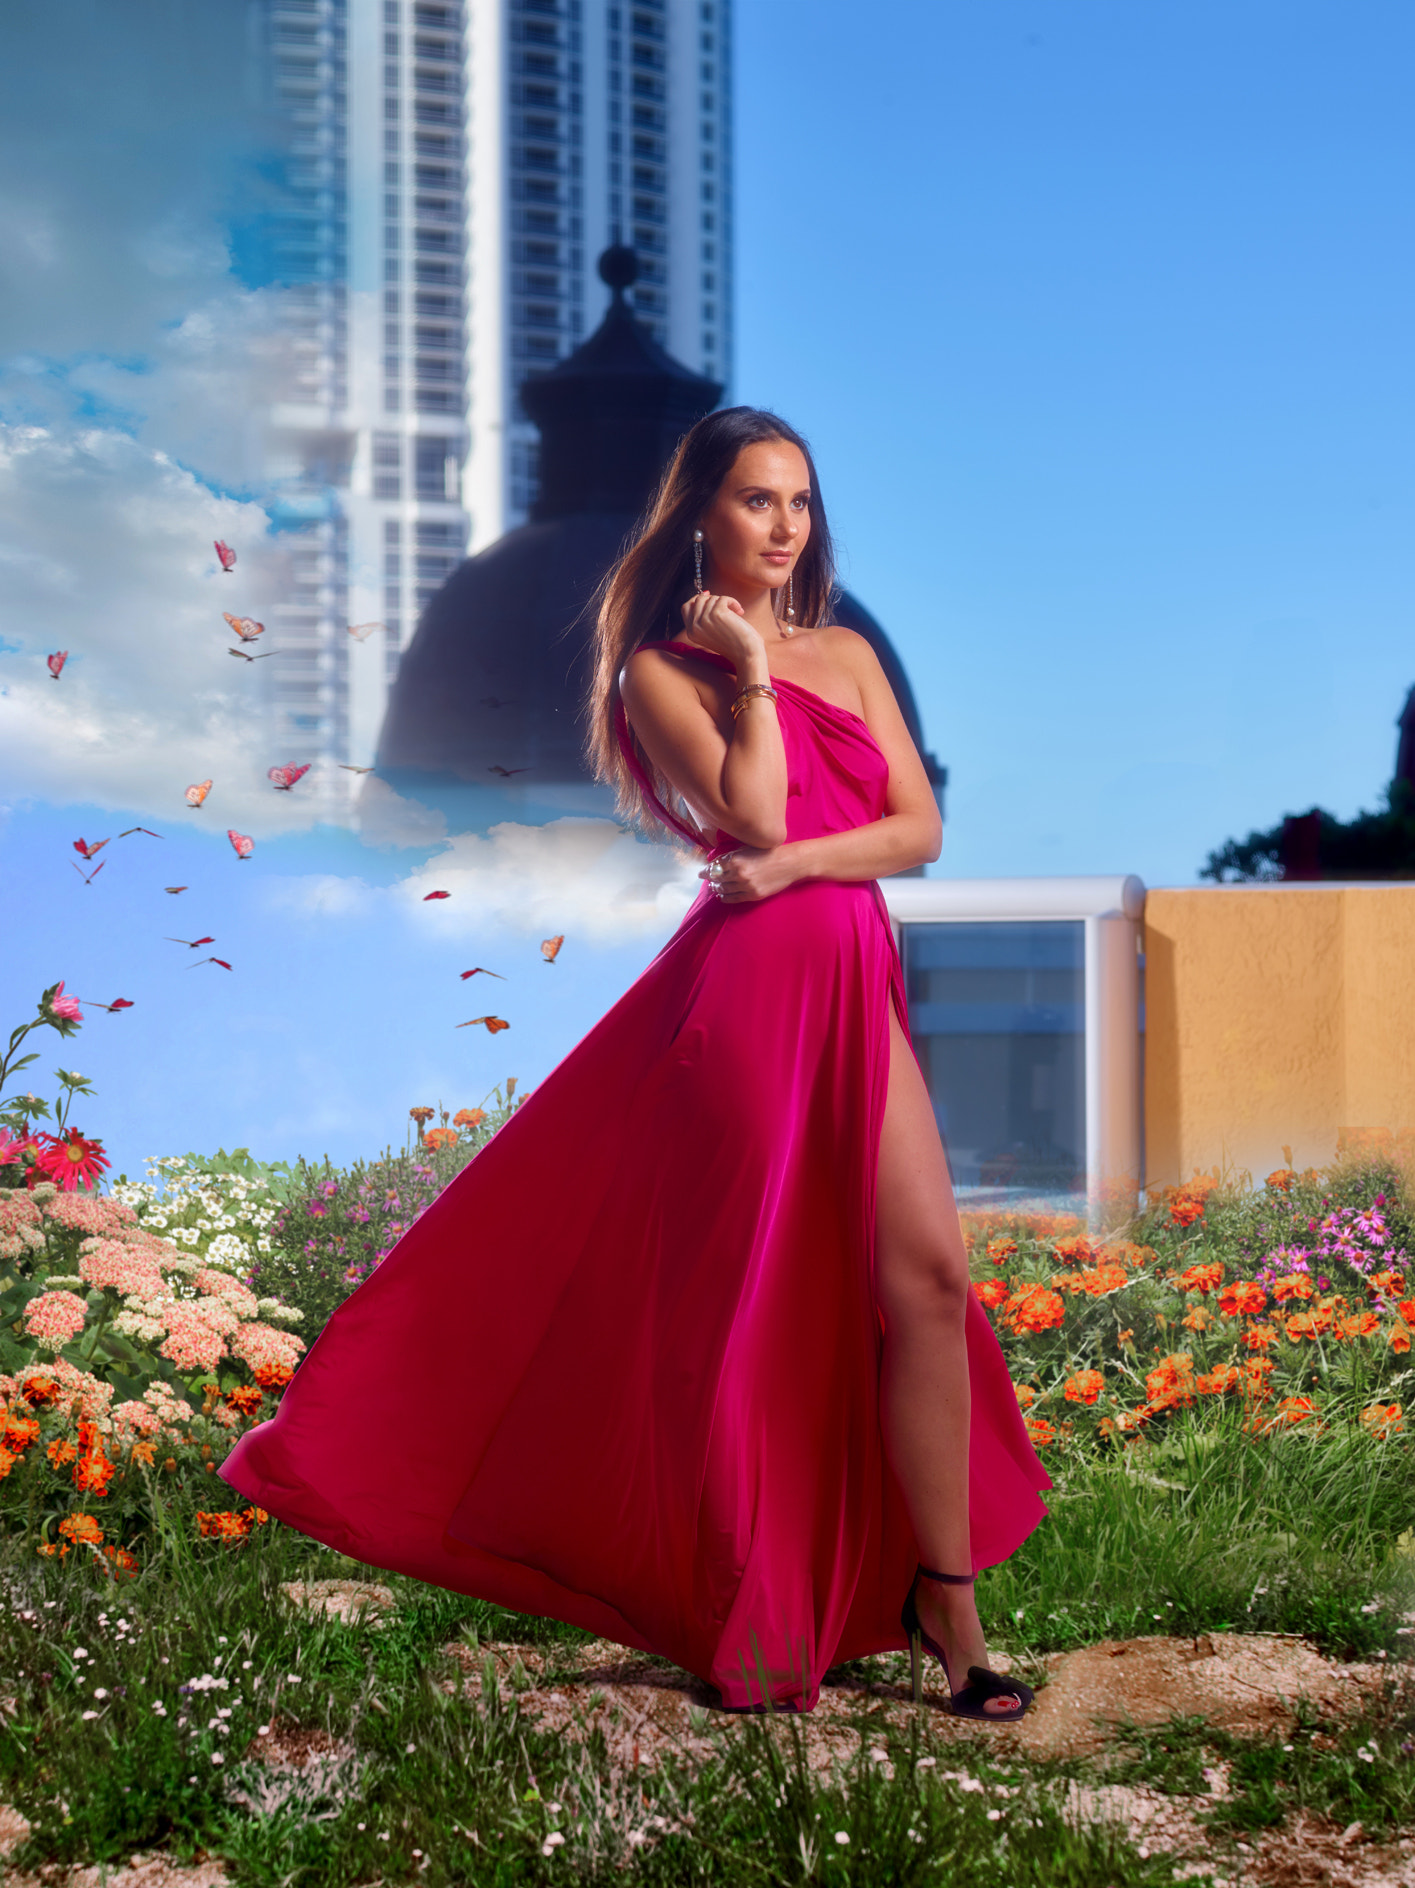 Phase One P65+ sample photo. Miami flowers field of dreams photography